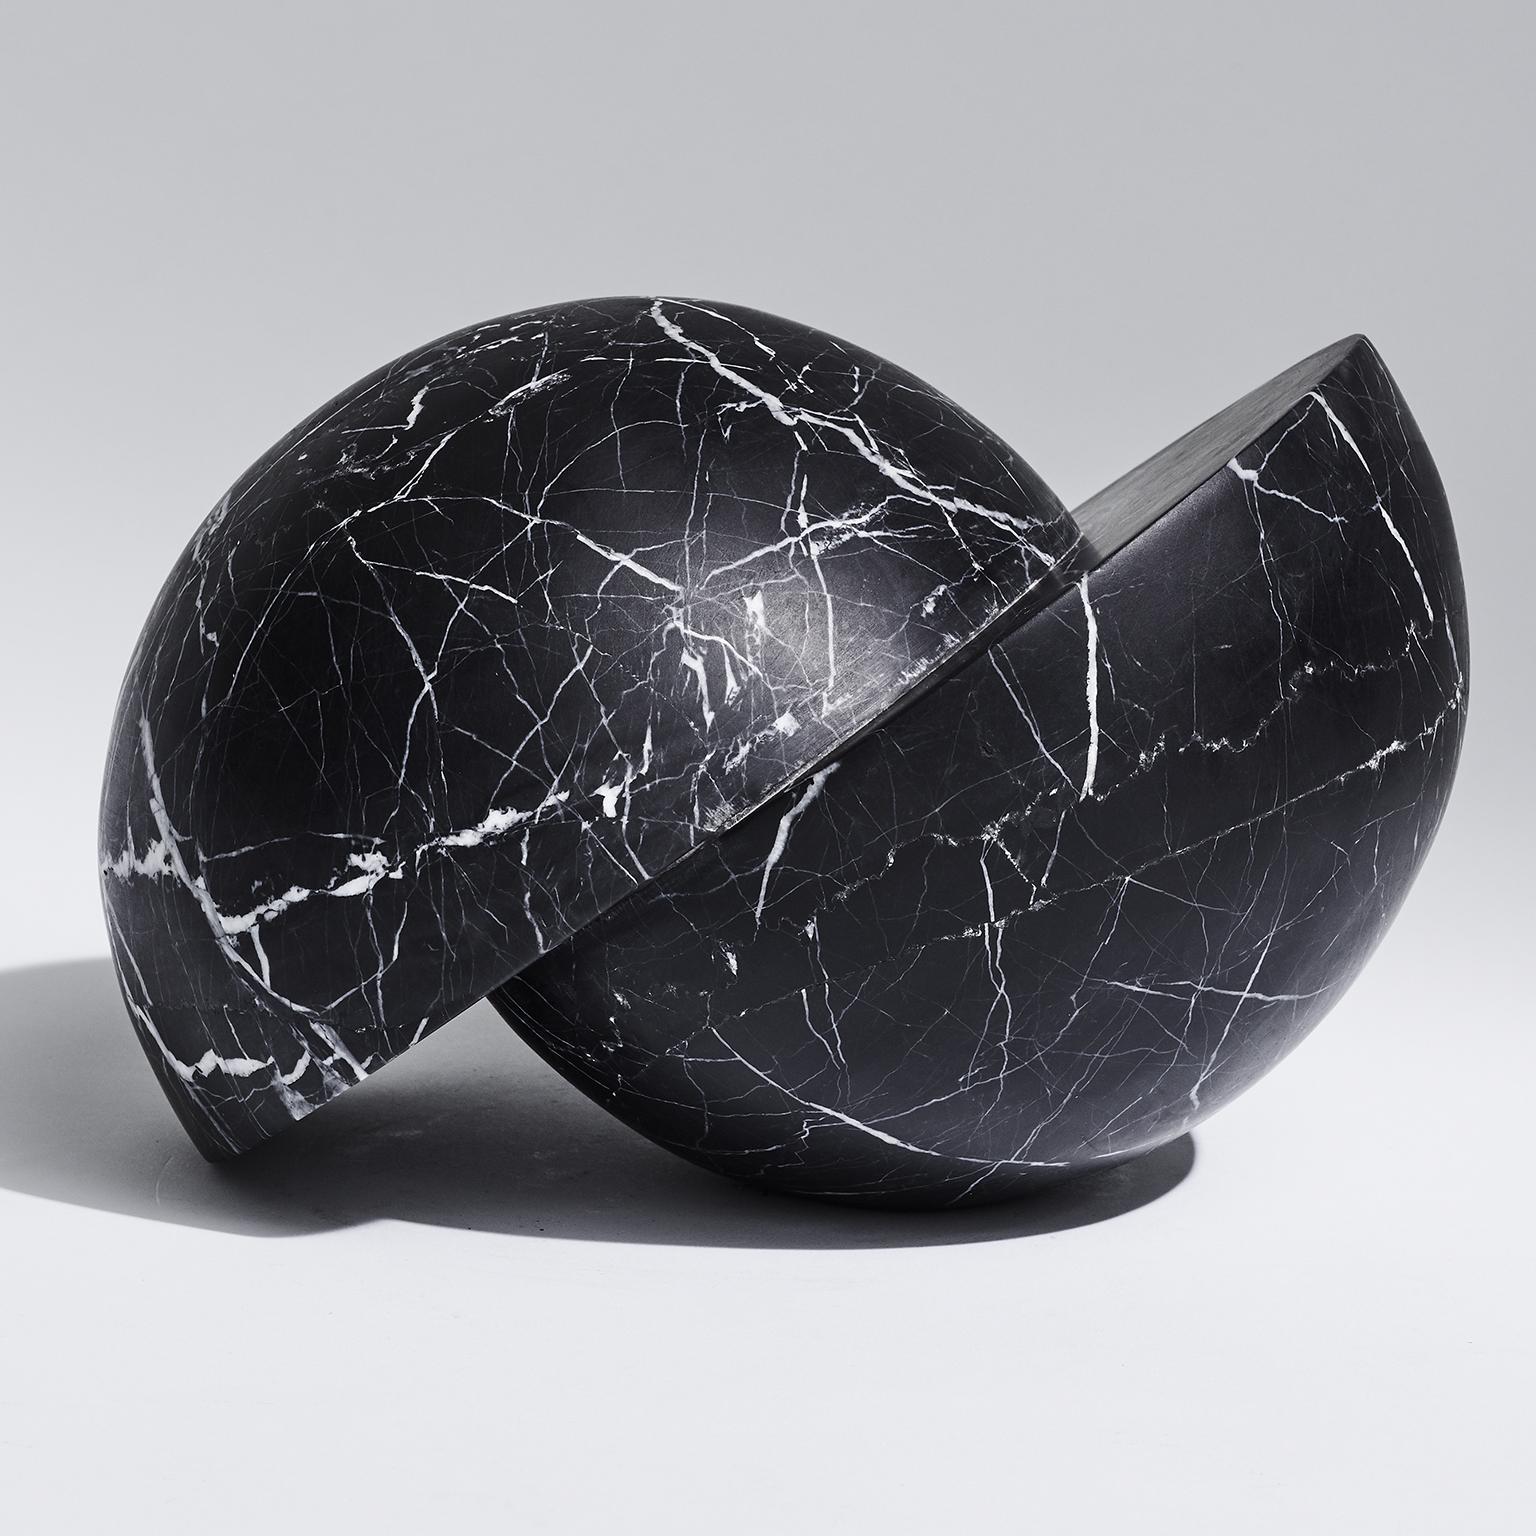 Shifting spheres - Cambio presents a collision of curves through elegant, hand carved Italian marble.

At home as a table centerpiece, sculpture or as shelf decor this is an evocative, versatile art piece.

Dimensions: L235mm/9.3